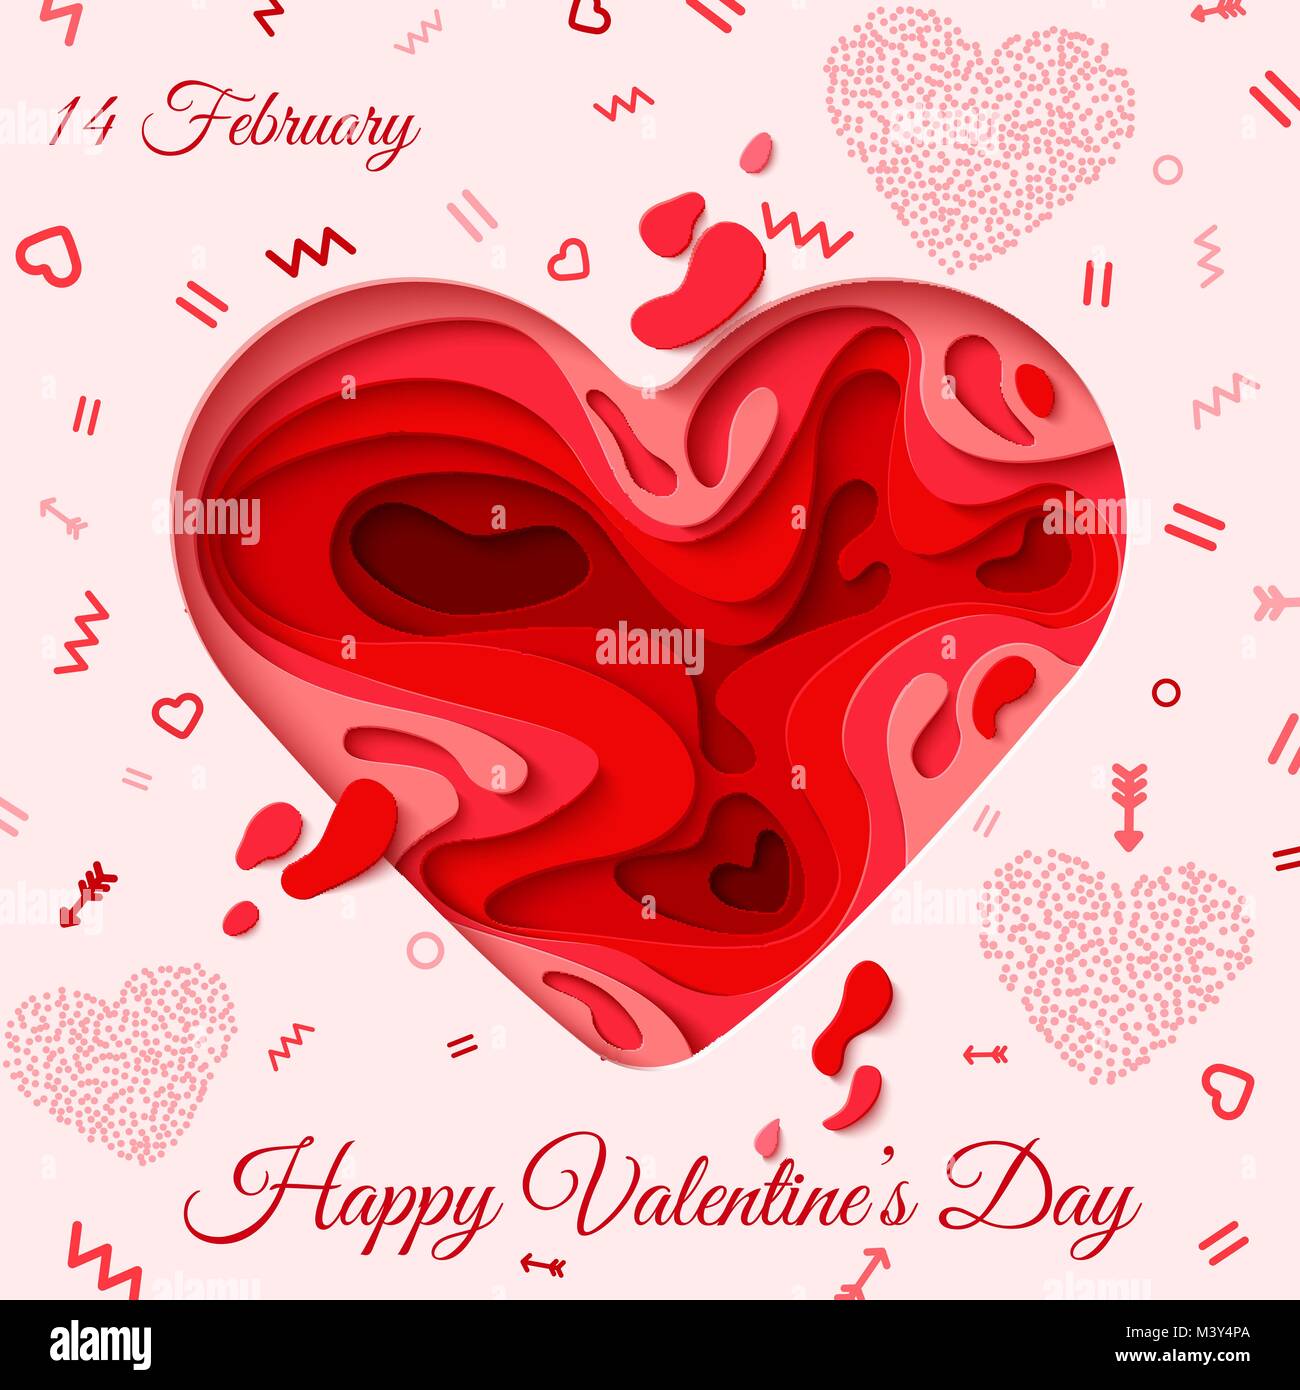 Happy Valentines Day greeting card. 3d paper cut heart concept ...